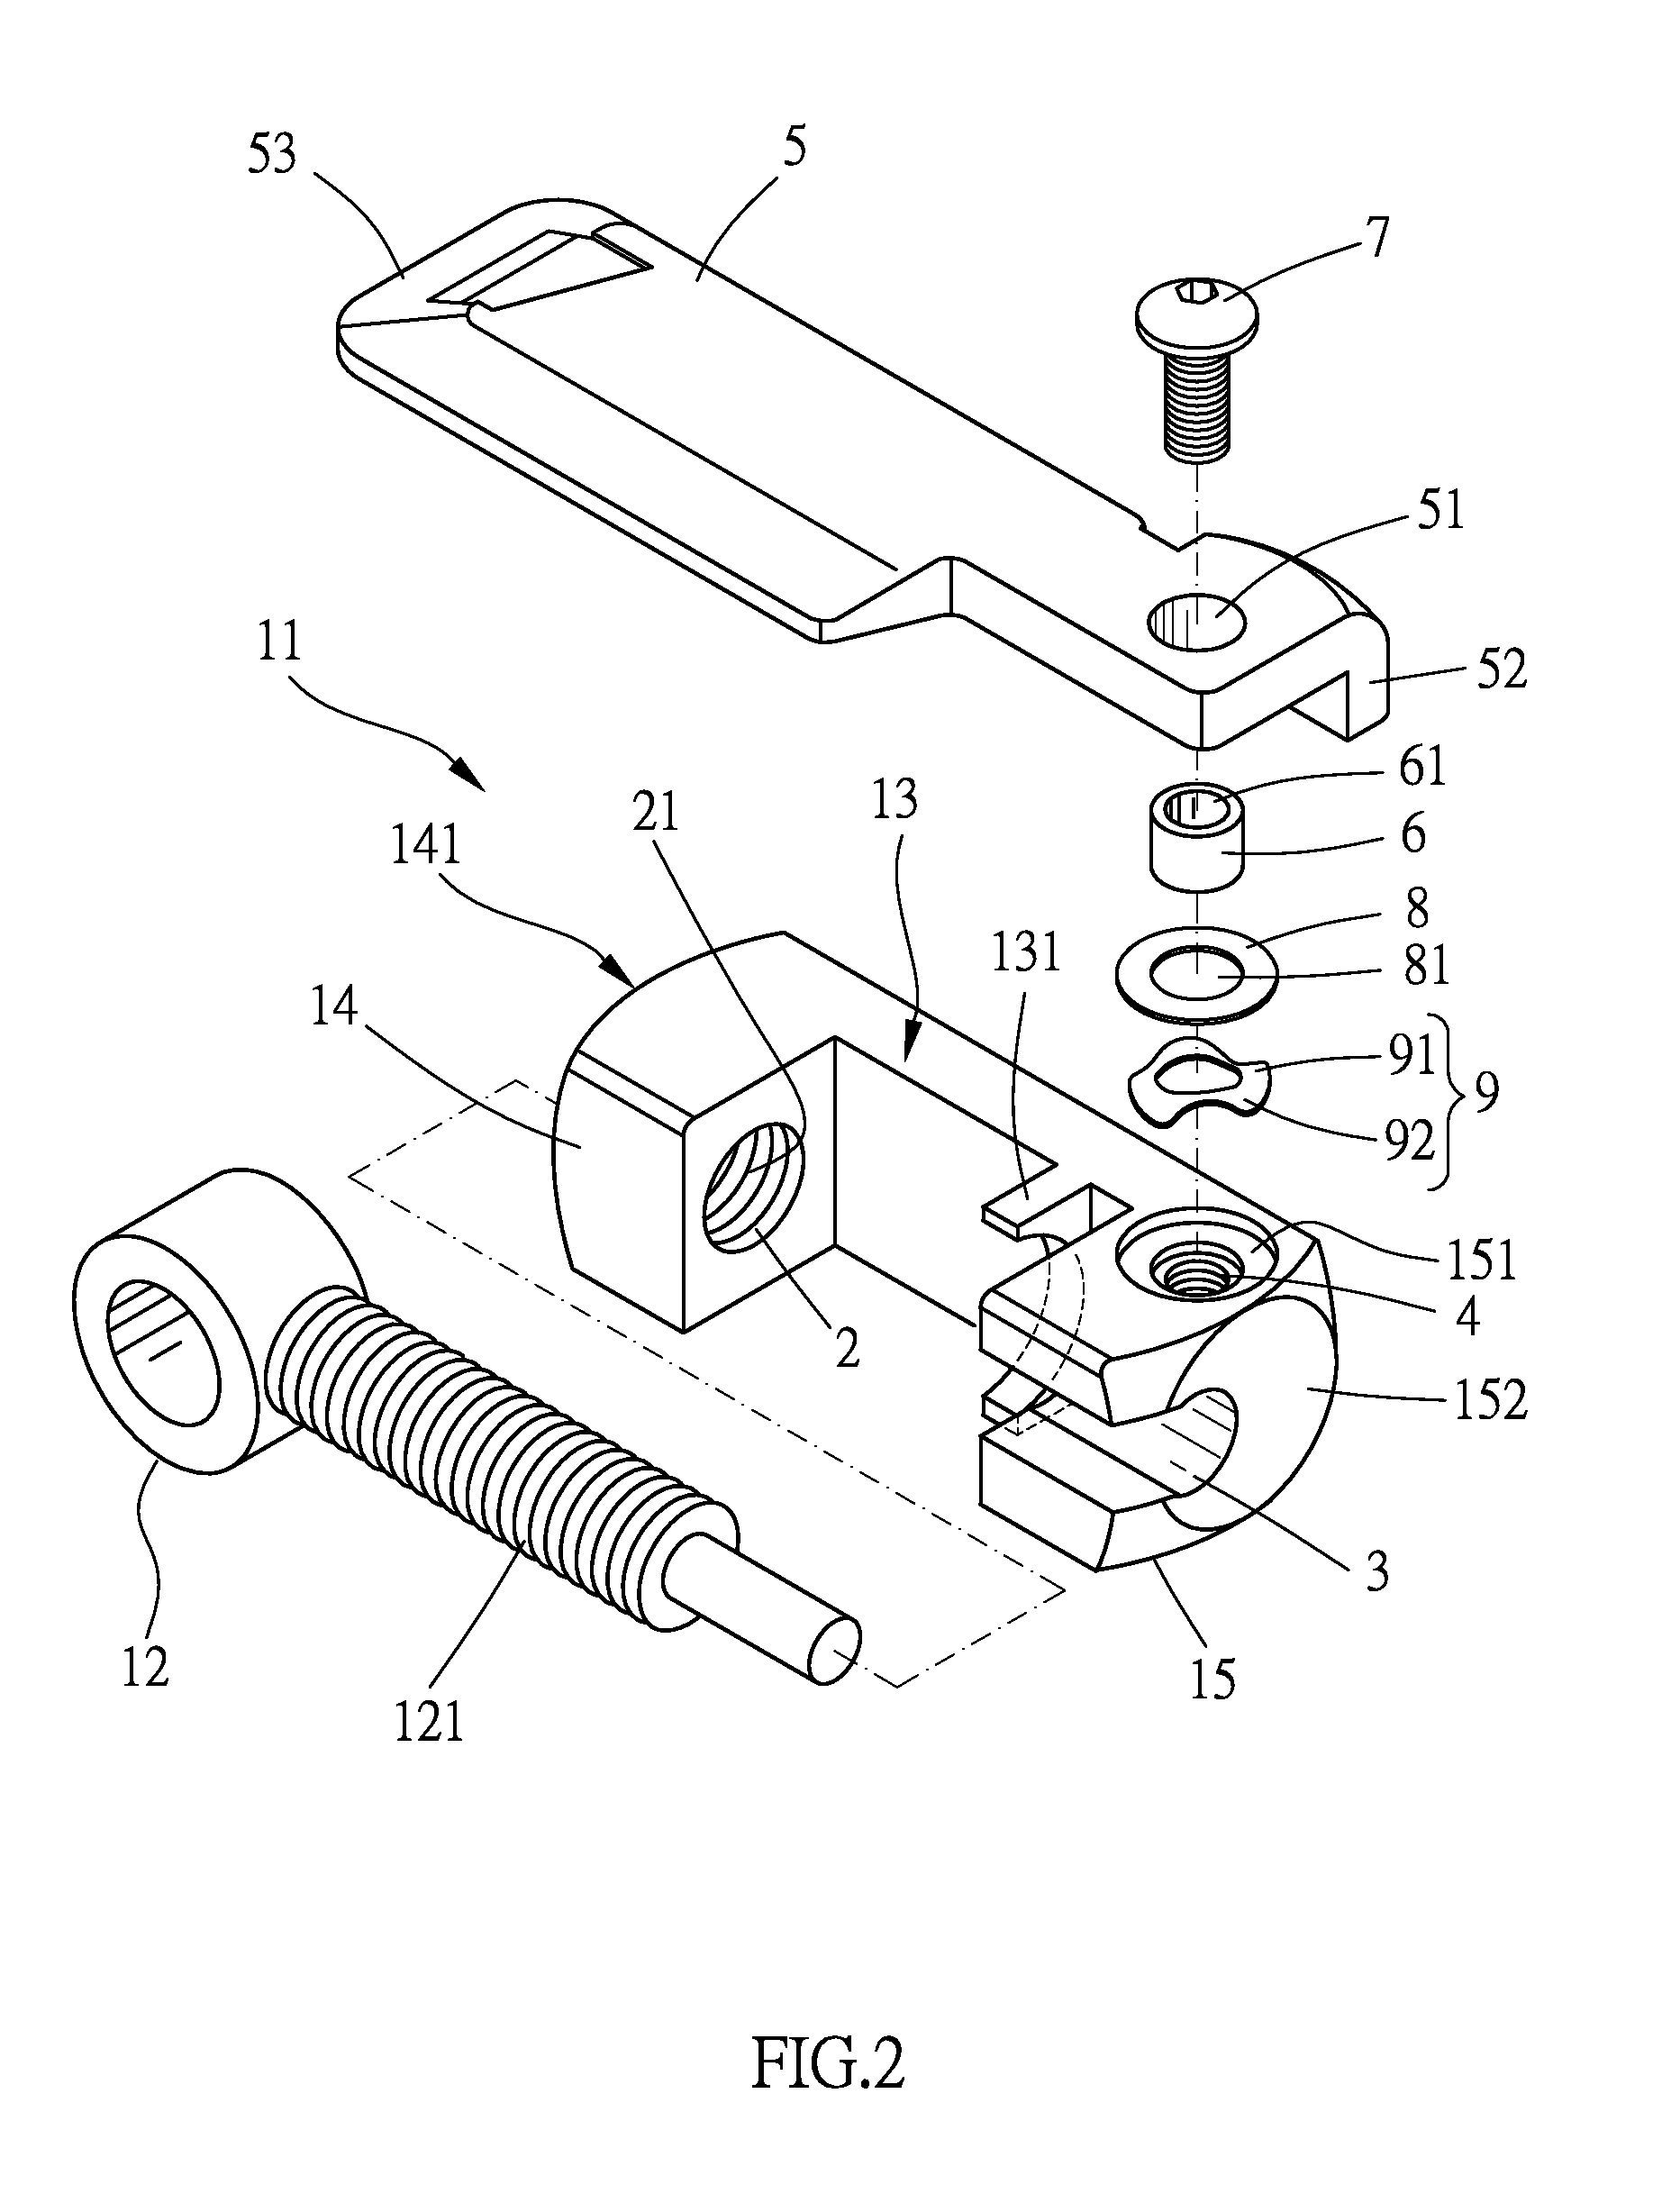 Bicycle chain breaker assembly